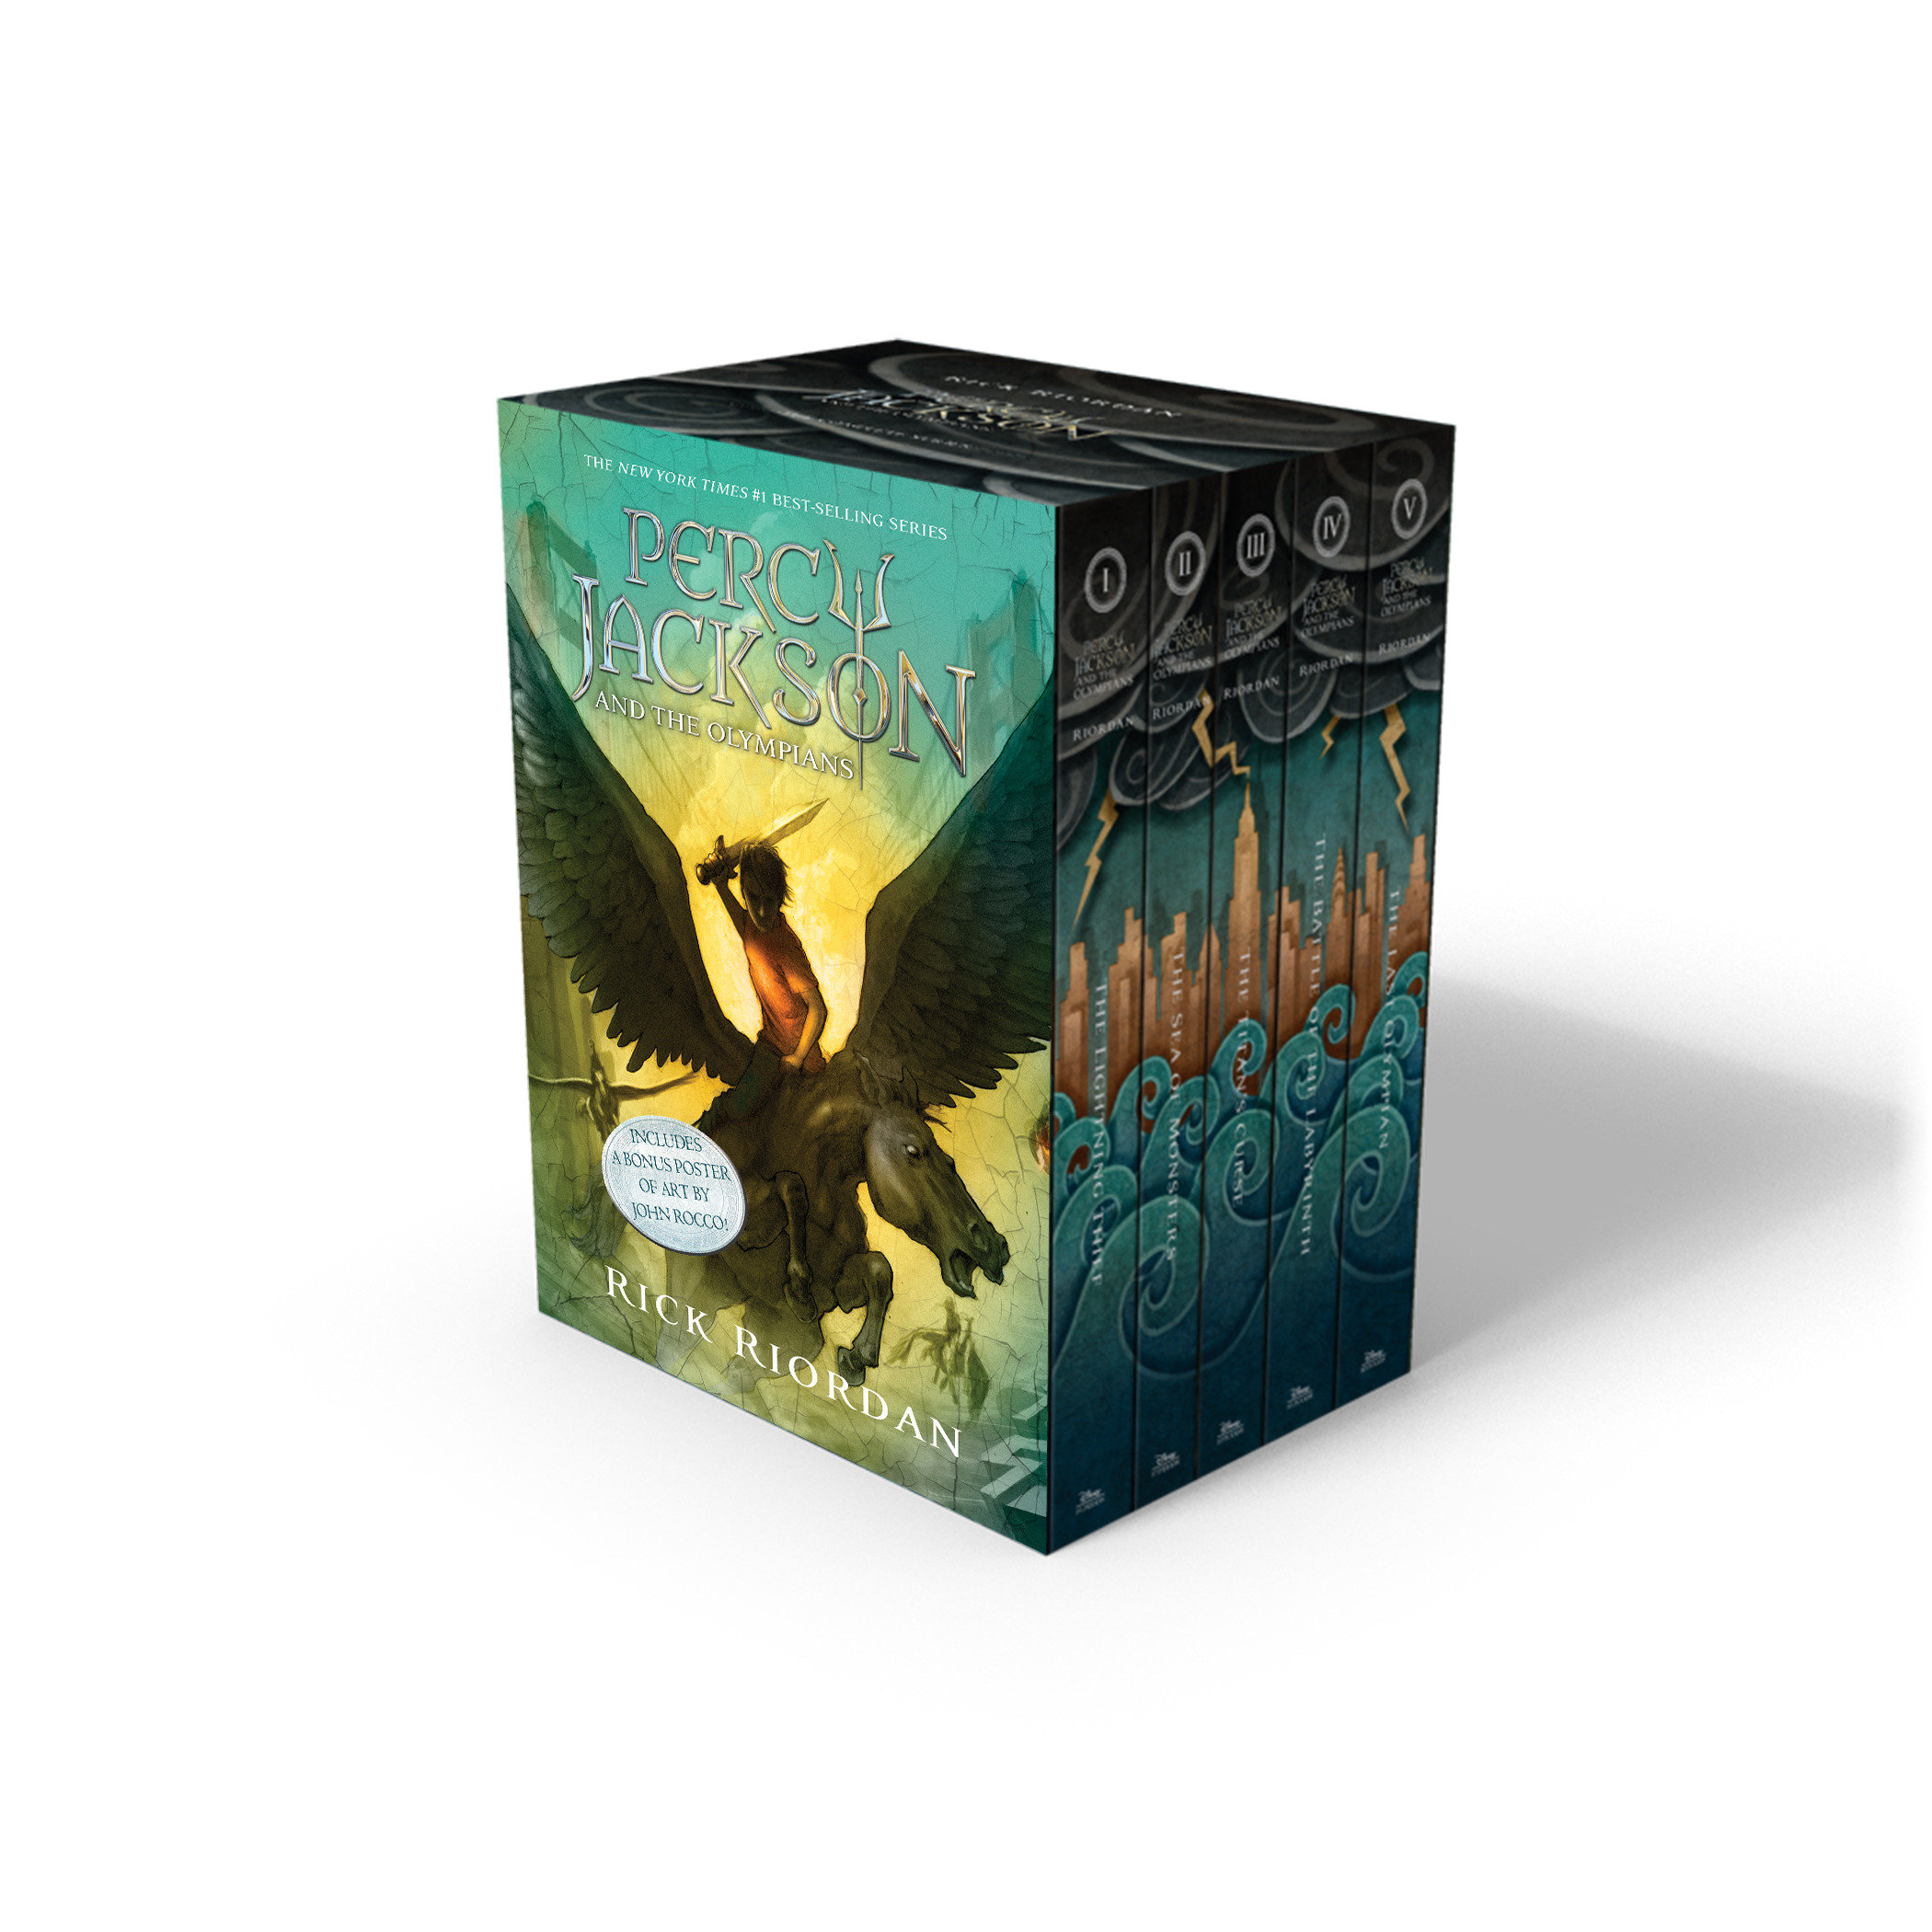 Percy Jackson and the Olympians 5 Book Paperback Boxed Set With Poster